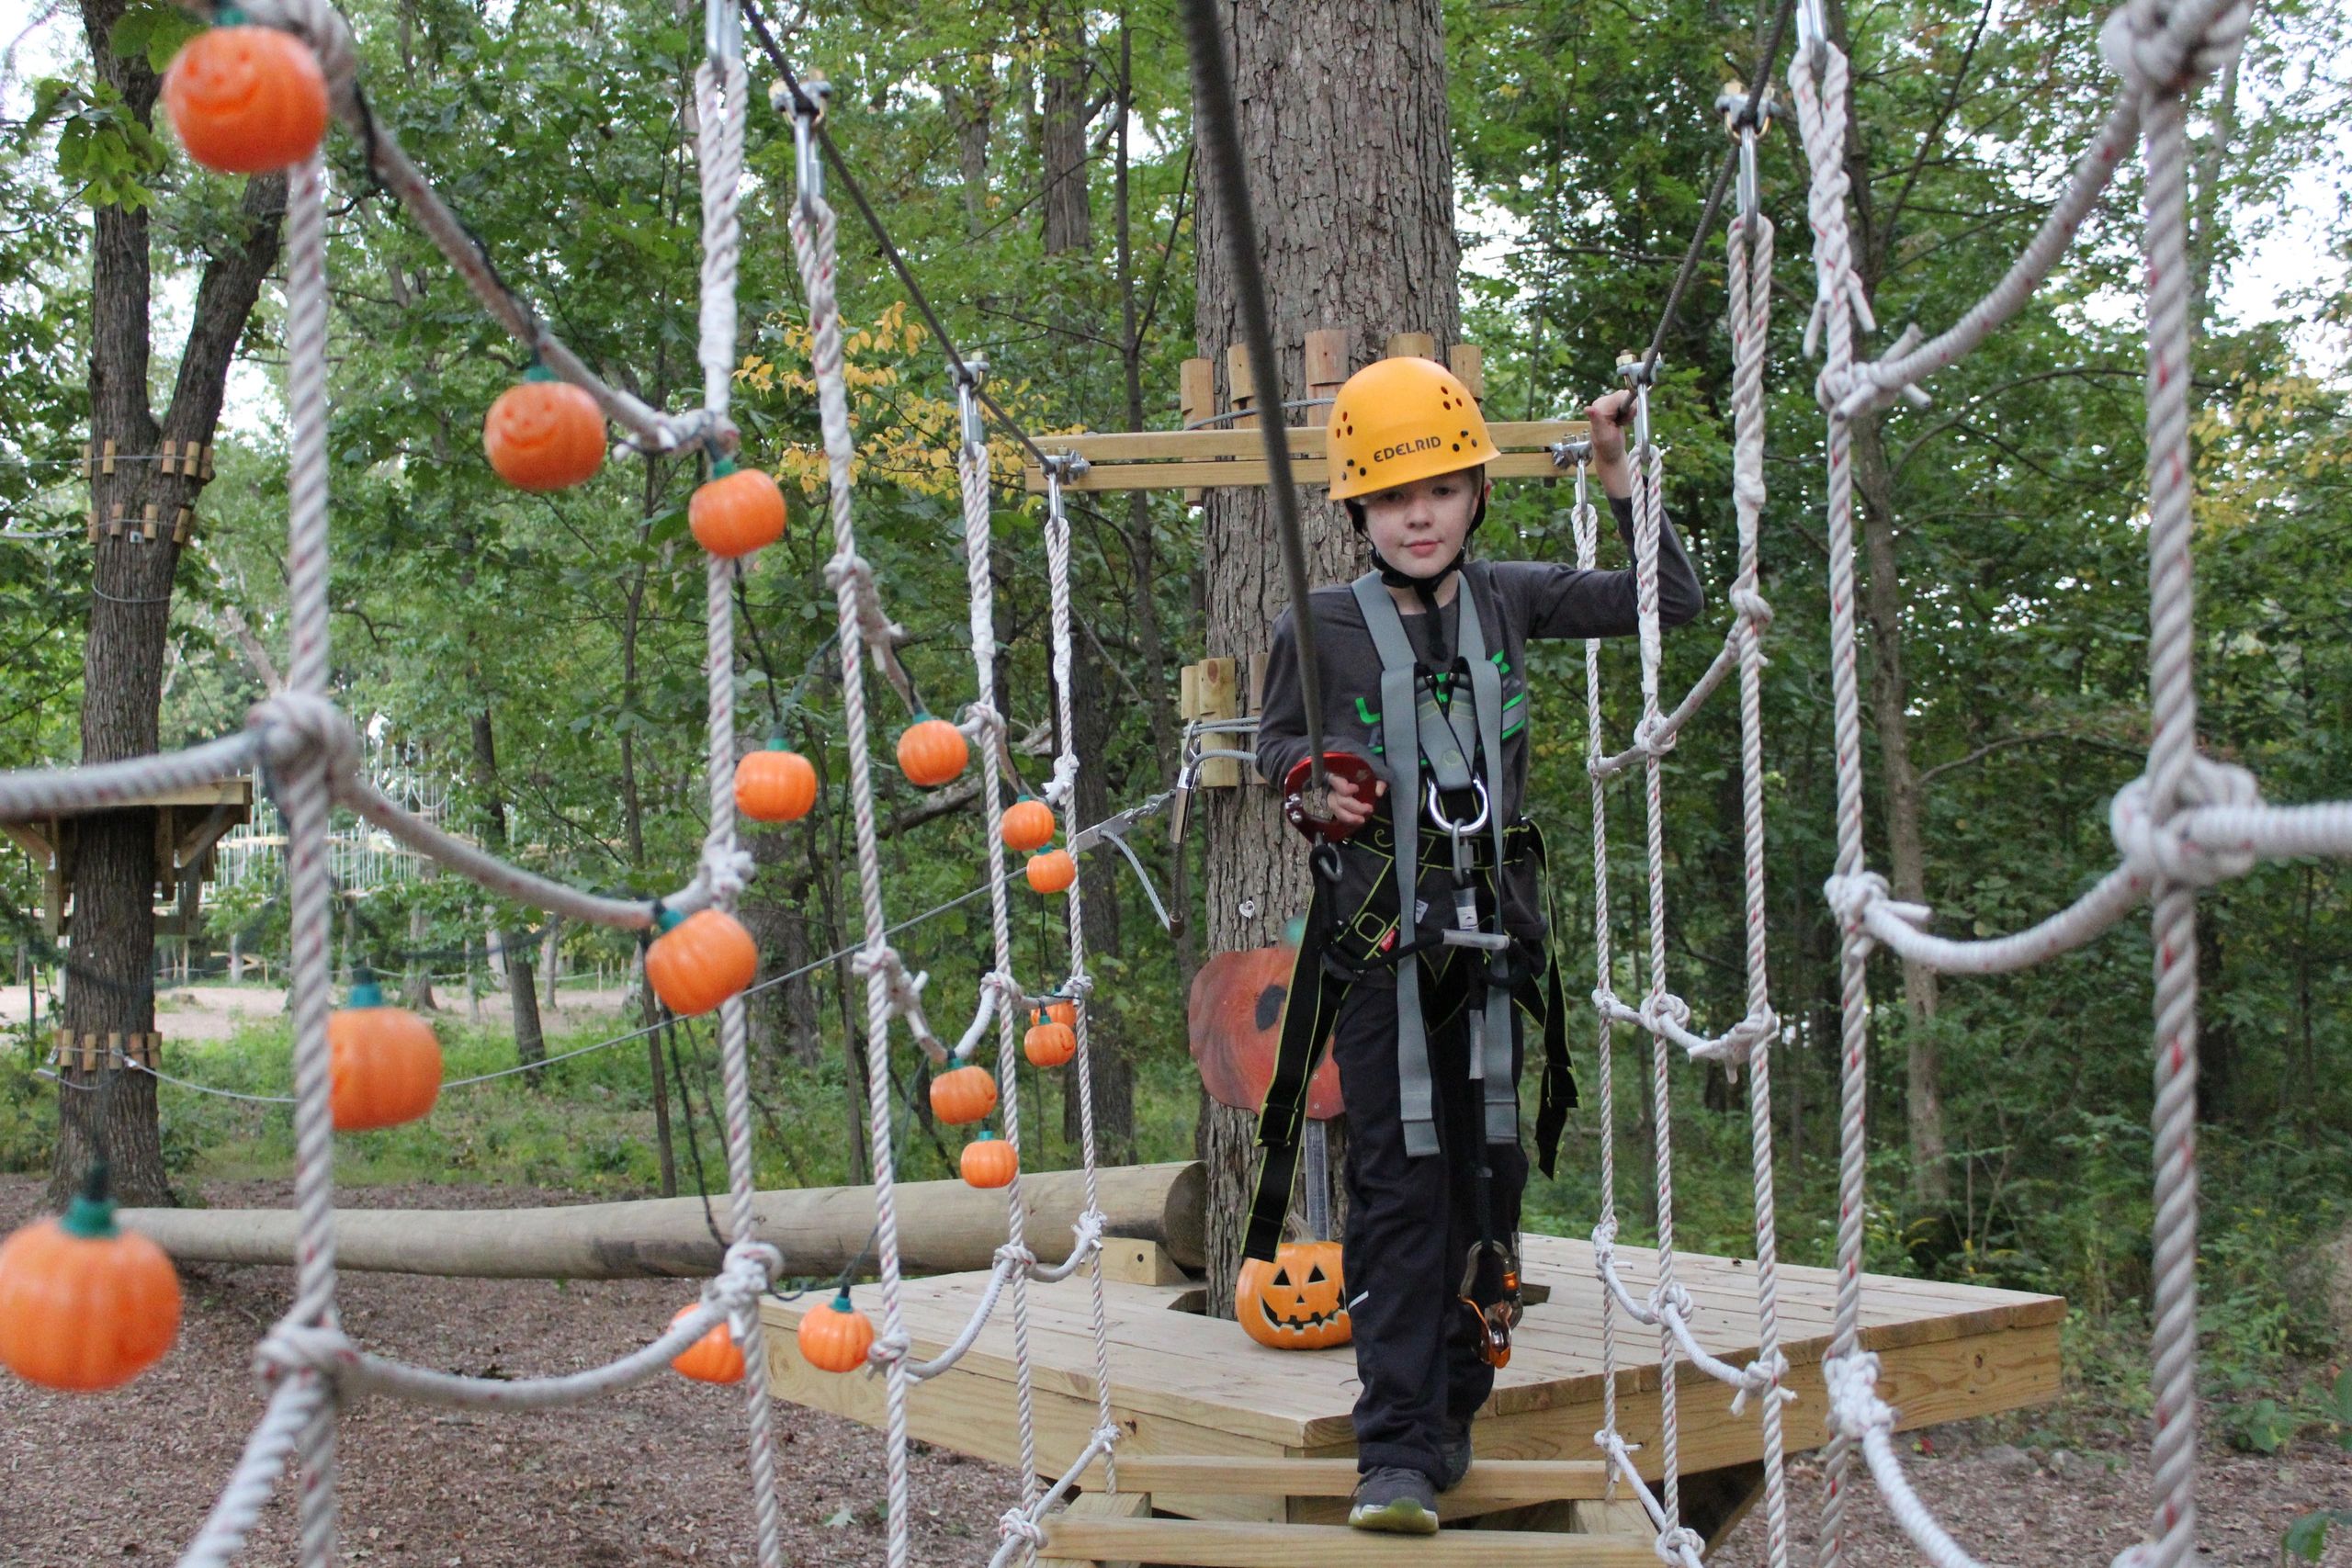 Kid's low ropes course on park district property in Northwest Indiana, 15 miles from Illinois.